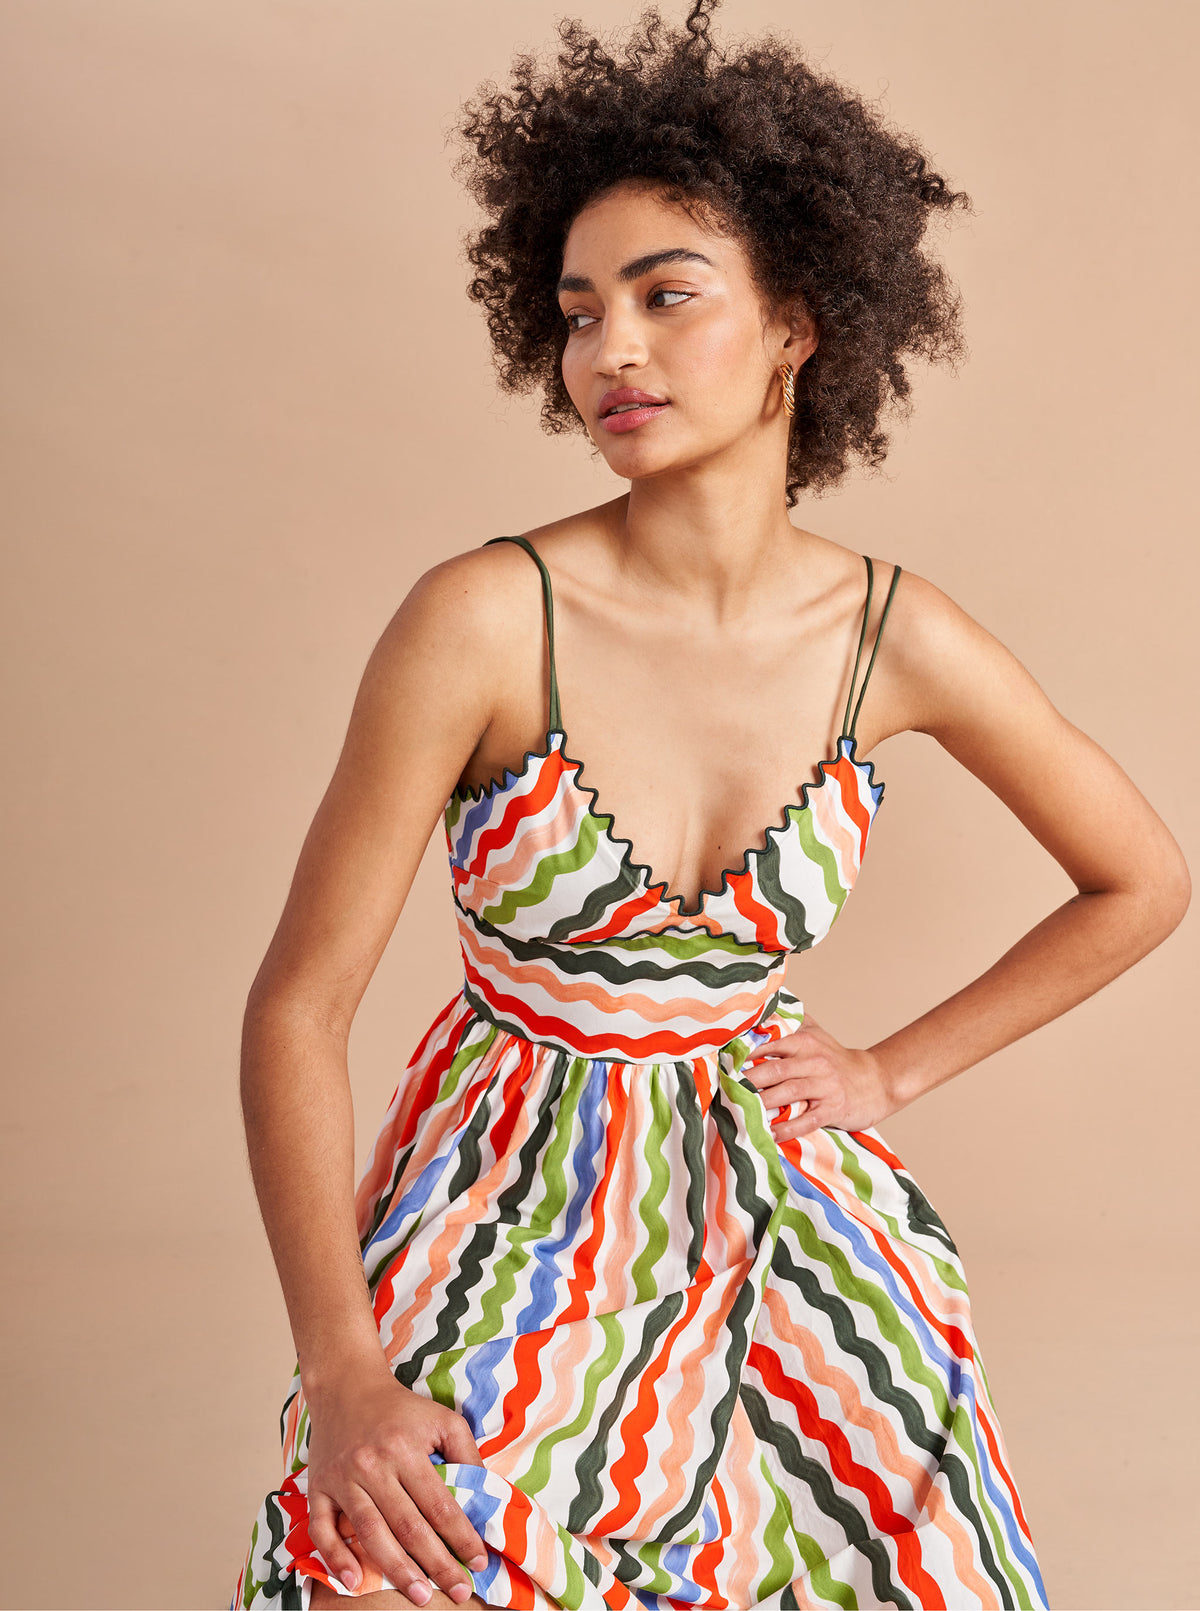 Named after La Bande muse and stylist, Jamie Mizrahi, this classic but modern silhouette in our favorite squiggle print, with a scallop, v-neckline is sweet with the right about of sass. Layer a bodysuit (or a swimsuit) under it or layer over with one of our stripey Marins for extra style punch, but you won't lose points for keeping it simple as in, simply perfect.